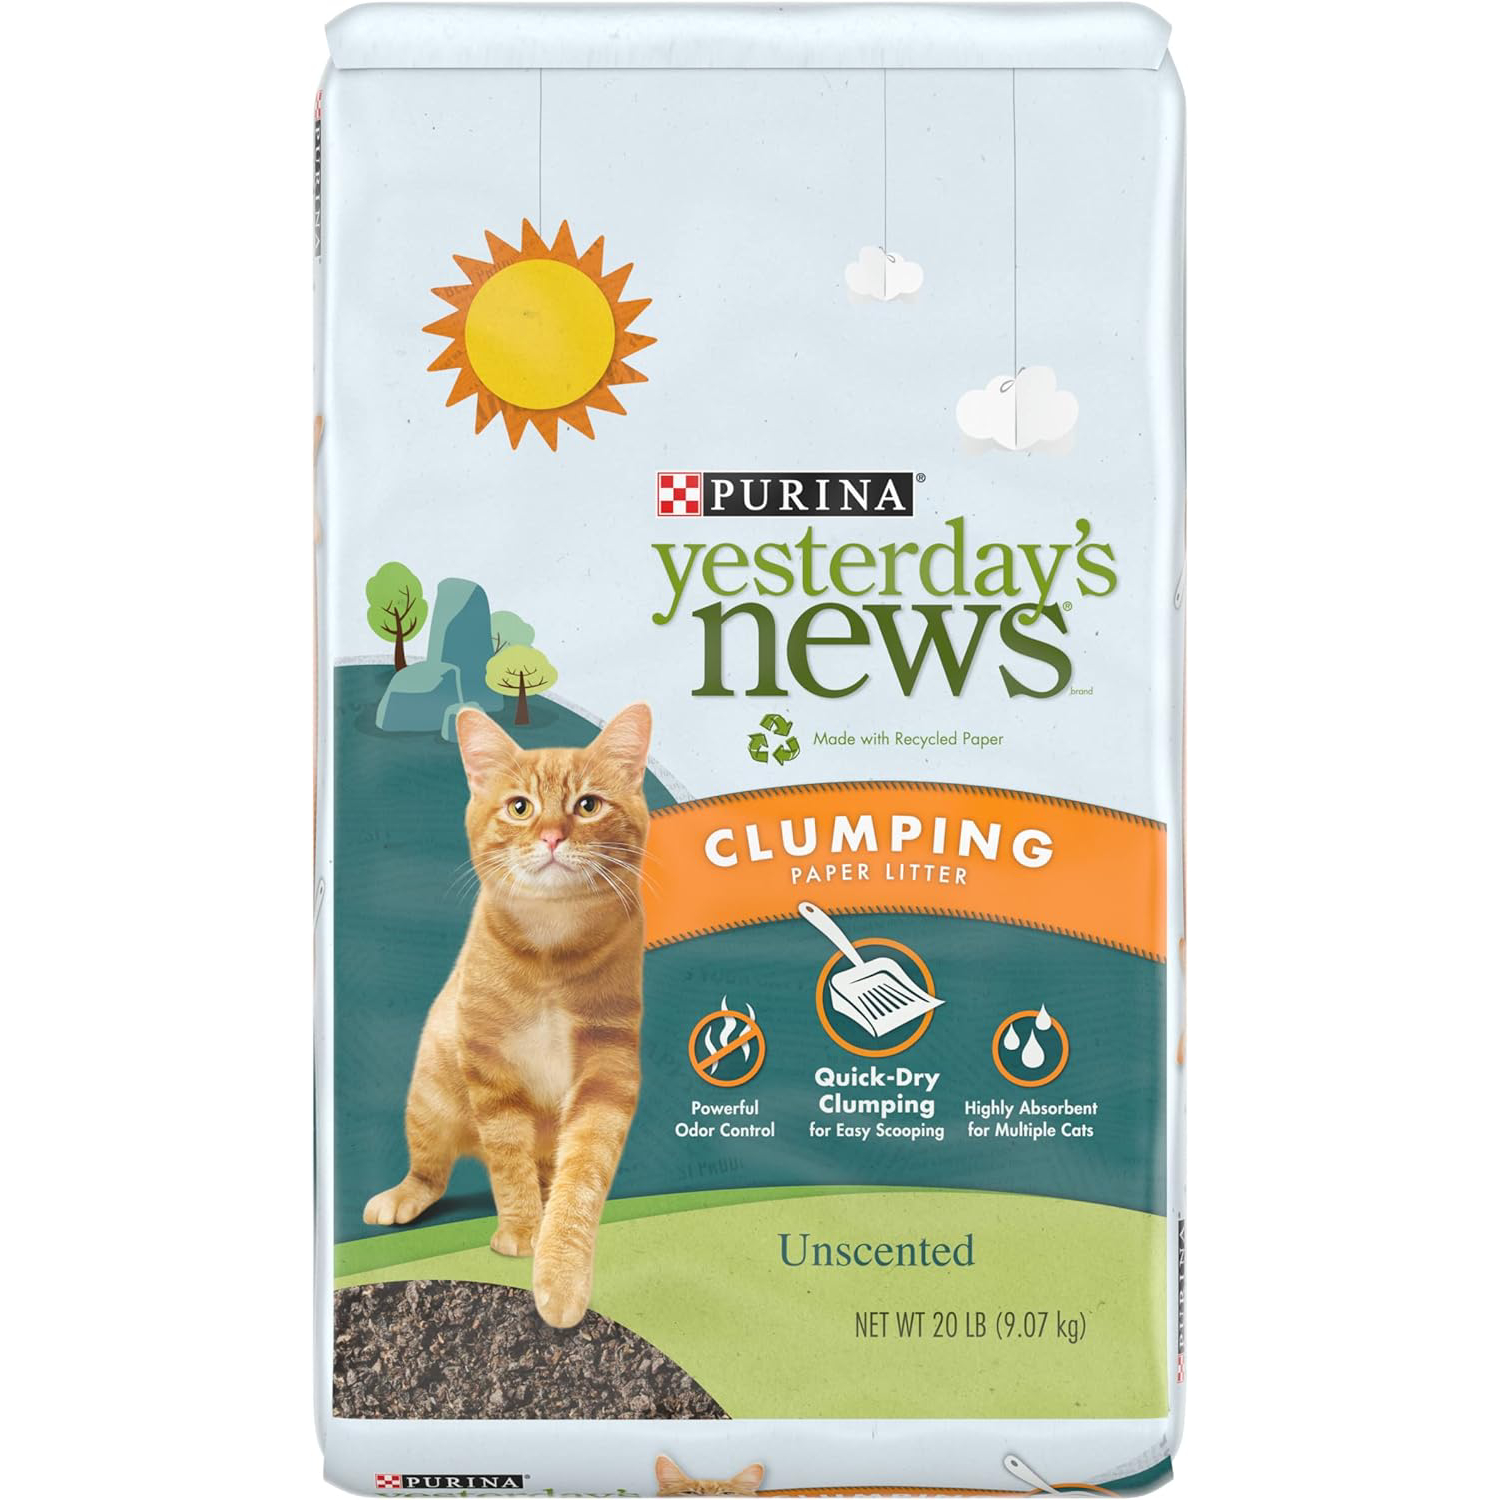 PURINA Yesterday's News Yesterday’s News Clumping Unscented Paper Cat Litter